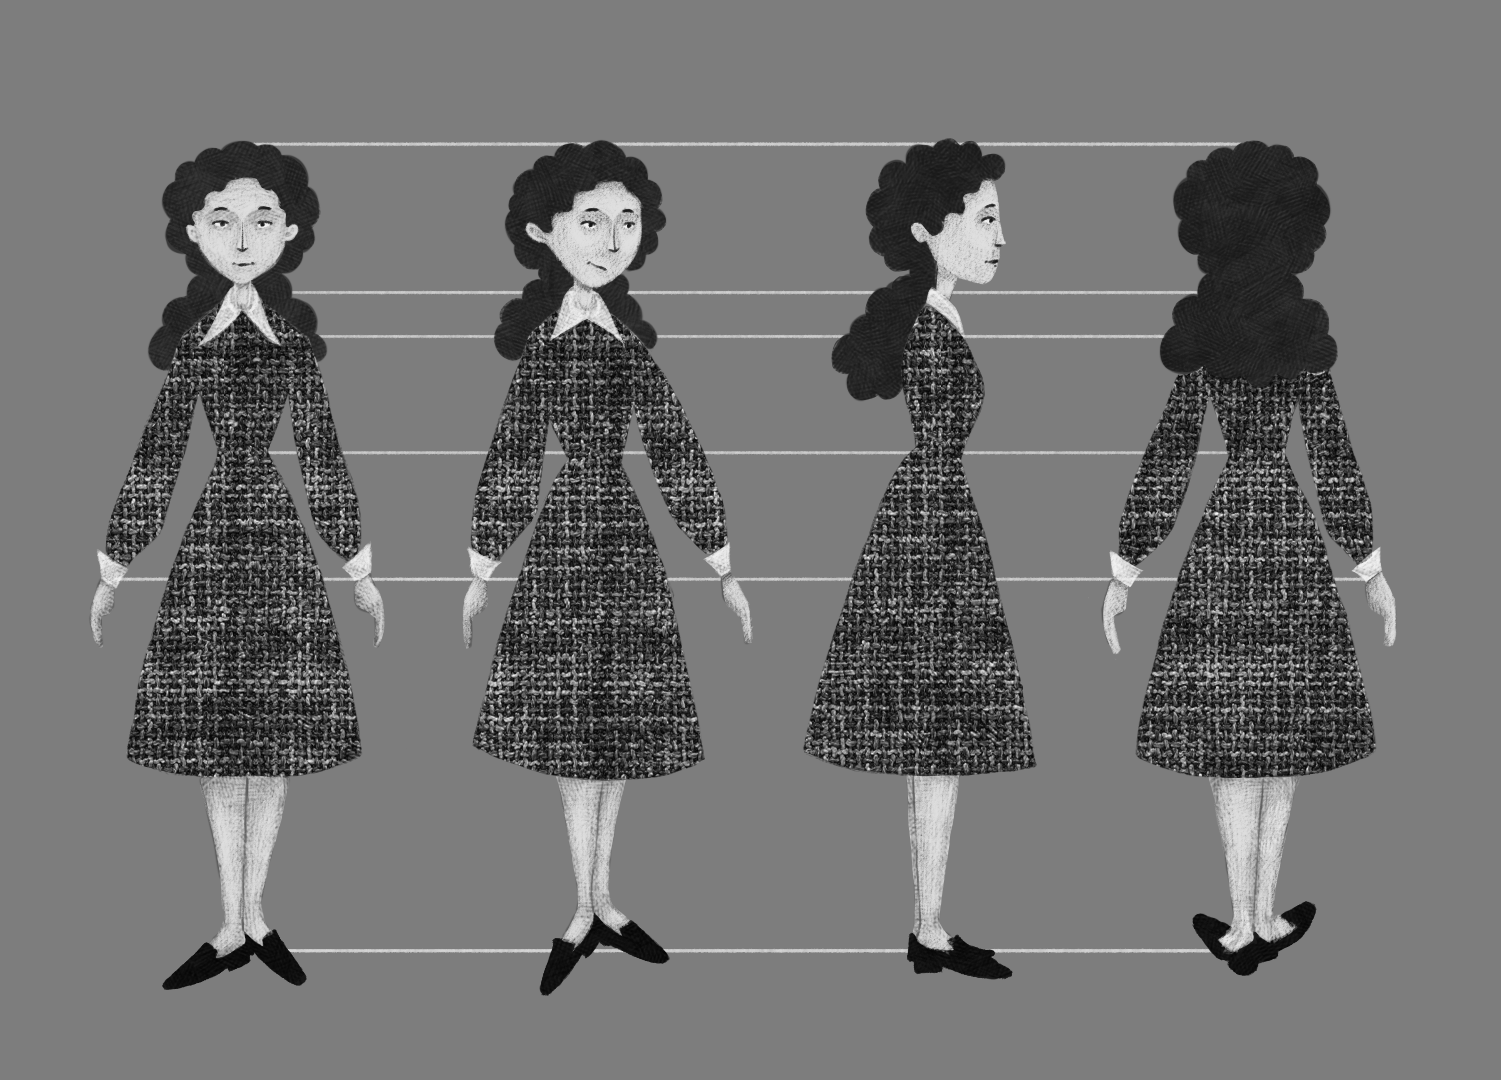 Character Turnaround for “And the Rest You Already Know”